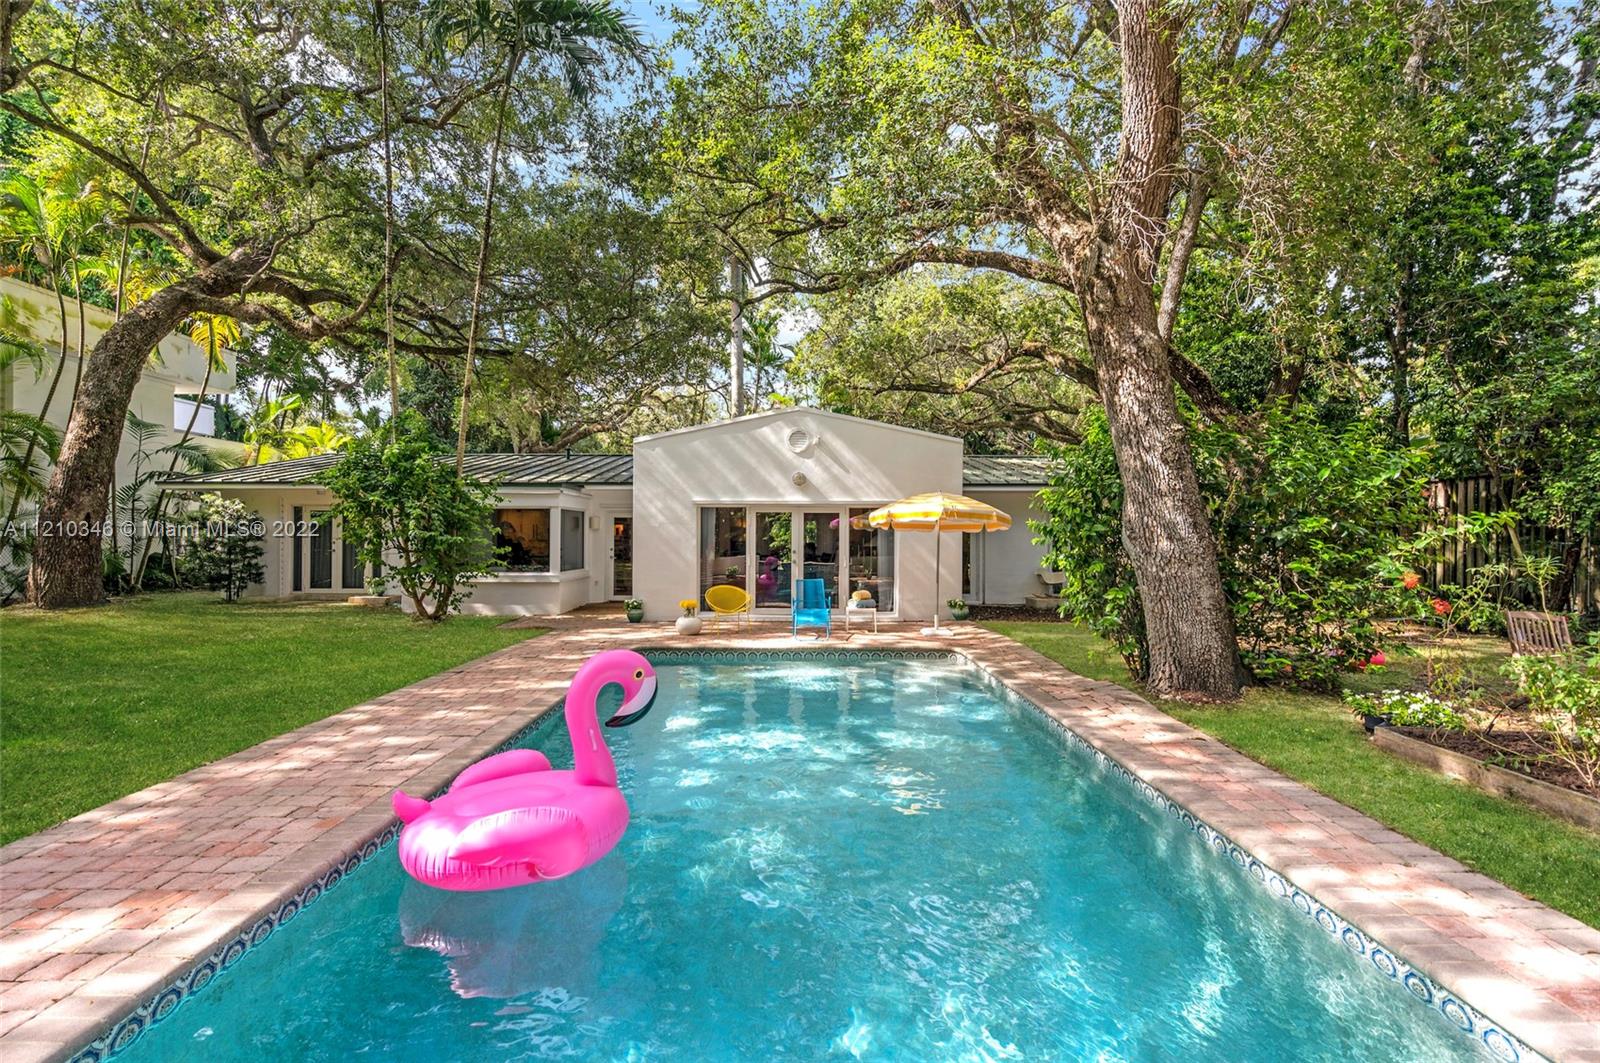 REDUCED! Coveted mid-century 4 bed / 3.5 bath pool home on a magnificent 19,700 sq ft lot in the heart of Coconut Grove. Enjoy serenity & privacy among majestic oaks, fruit trees, and the sounds of native birds, just minutes from downtown Miami. Located on lushly green Poinciana Ave, this gated sub-tropical paradise retains the bohemian ambience that’s attracted artists, musicians and writers to The Grove for decades. Occupied by current owners since 2004. Recently painted and refreshed. Galvalume metal roof. Two-car garage with Tesla charger installed. Under a mile to top schools, houses of worship and nature preserves. Marina, playgrounds, playing fields, farmers market, cafes and foodie-favorite restaurants are all within easy biking distance. Priced to sell & ready to show.